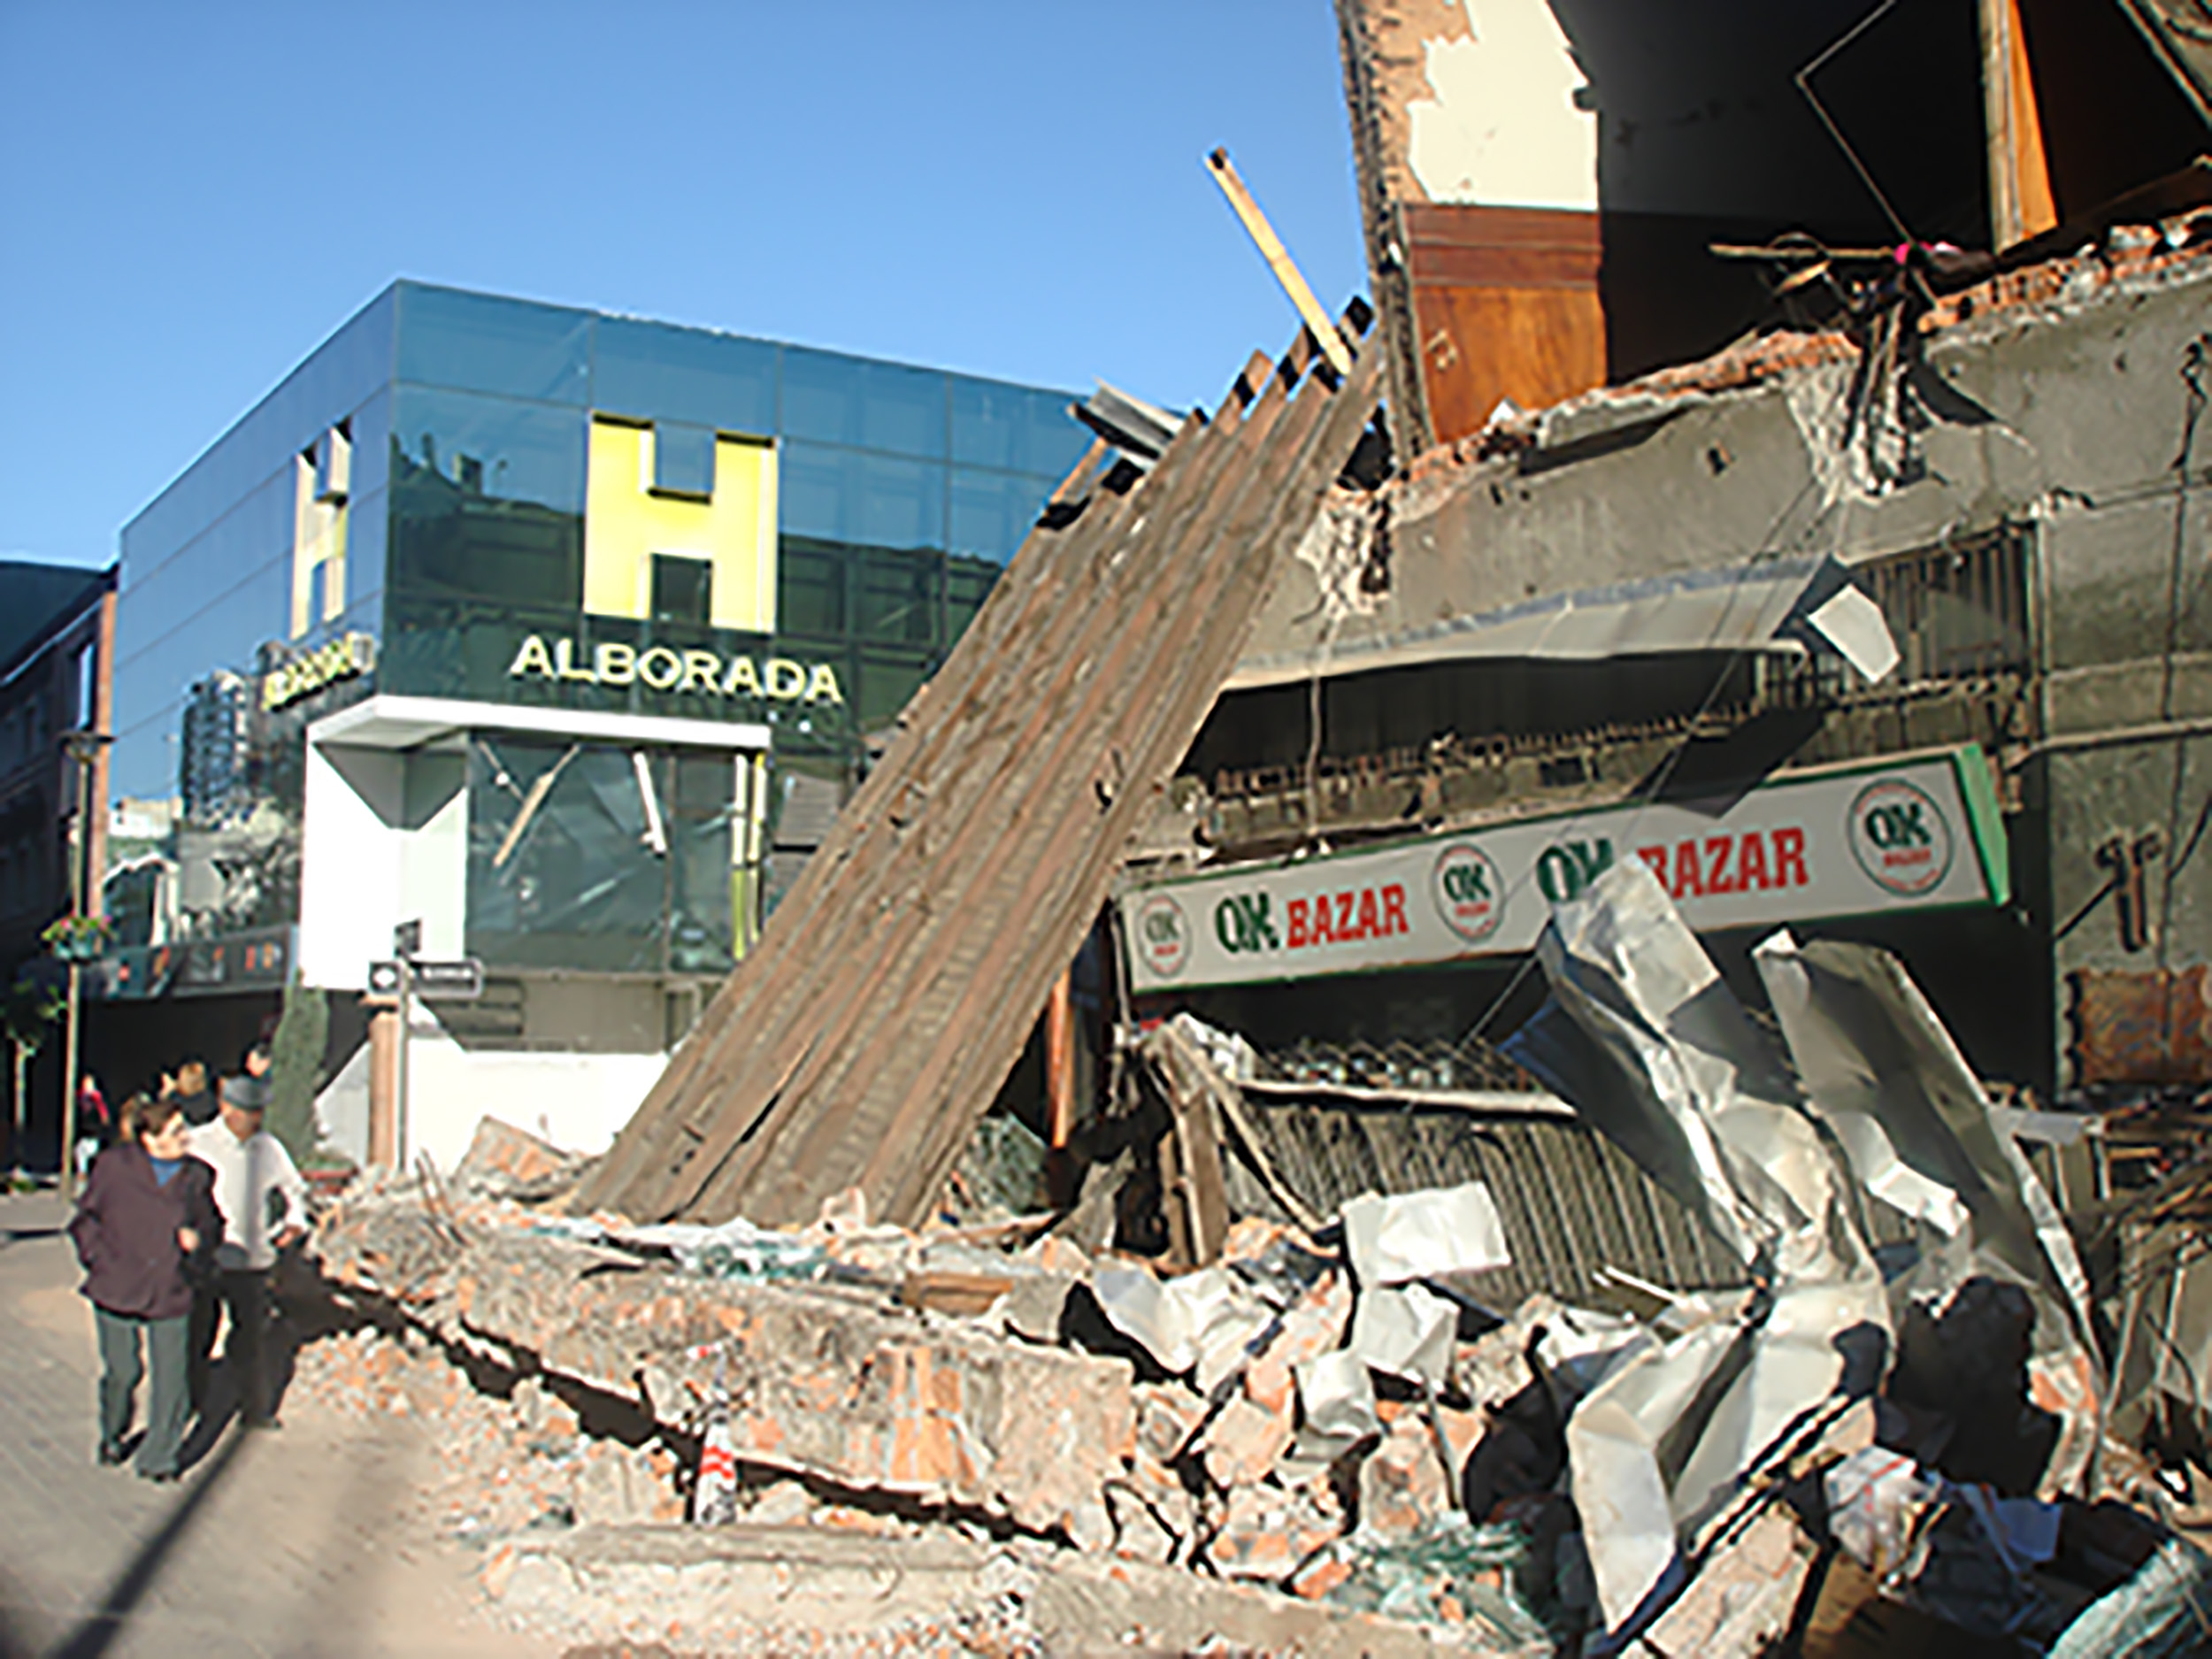 upright building next to fallen building in earthquake